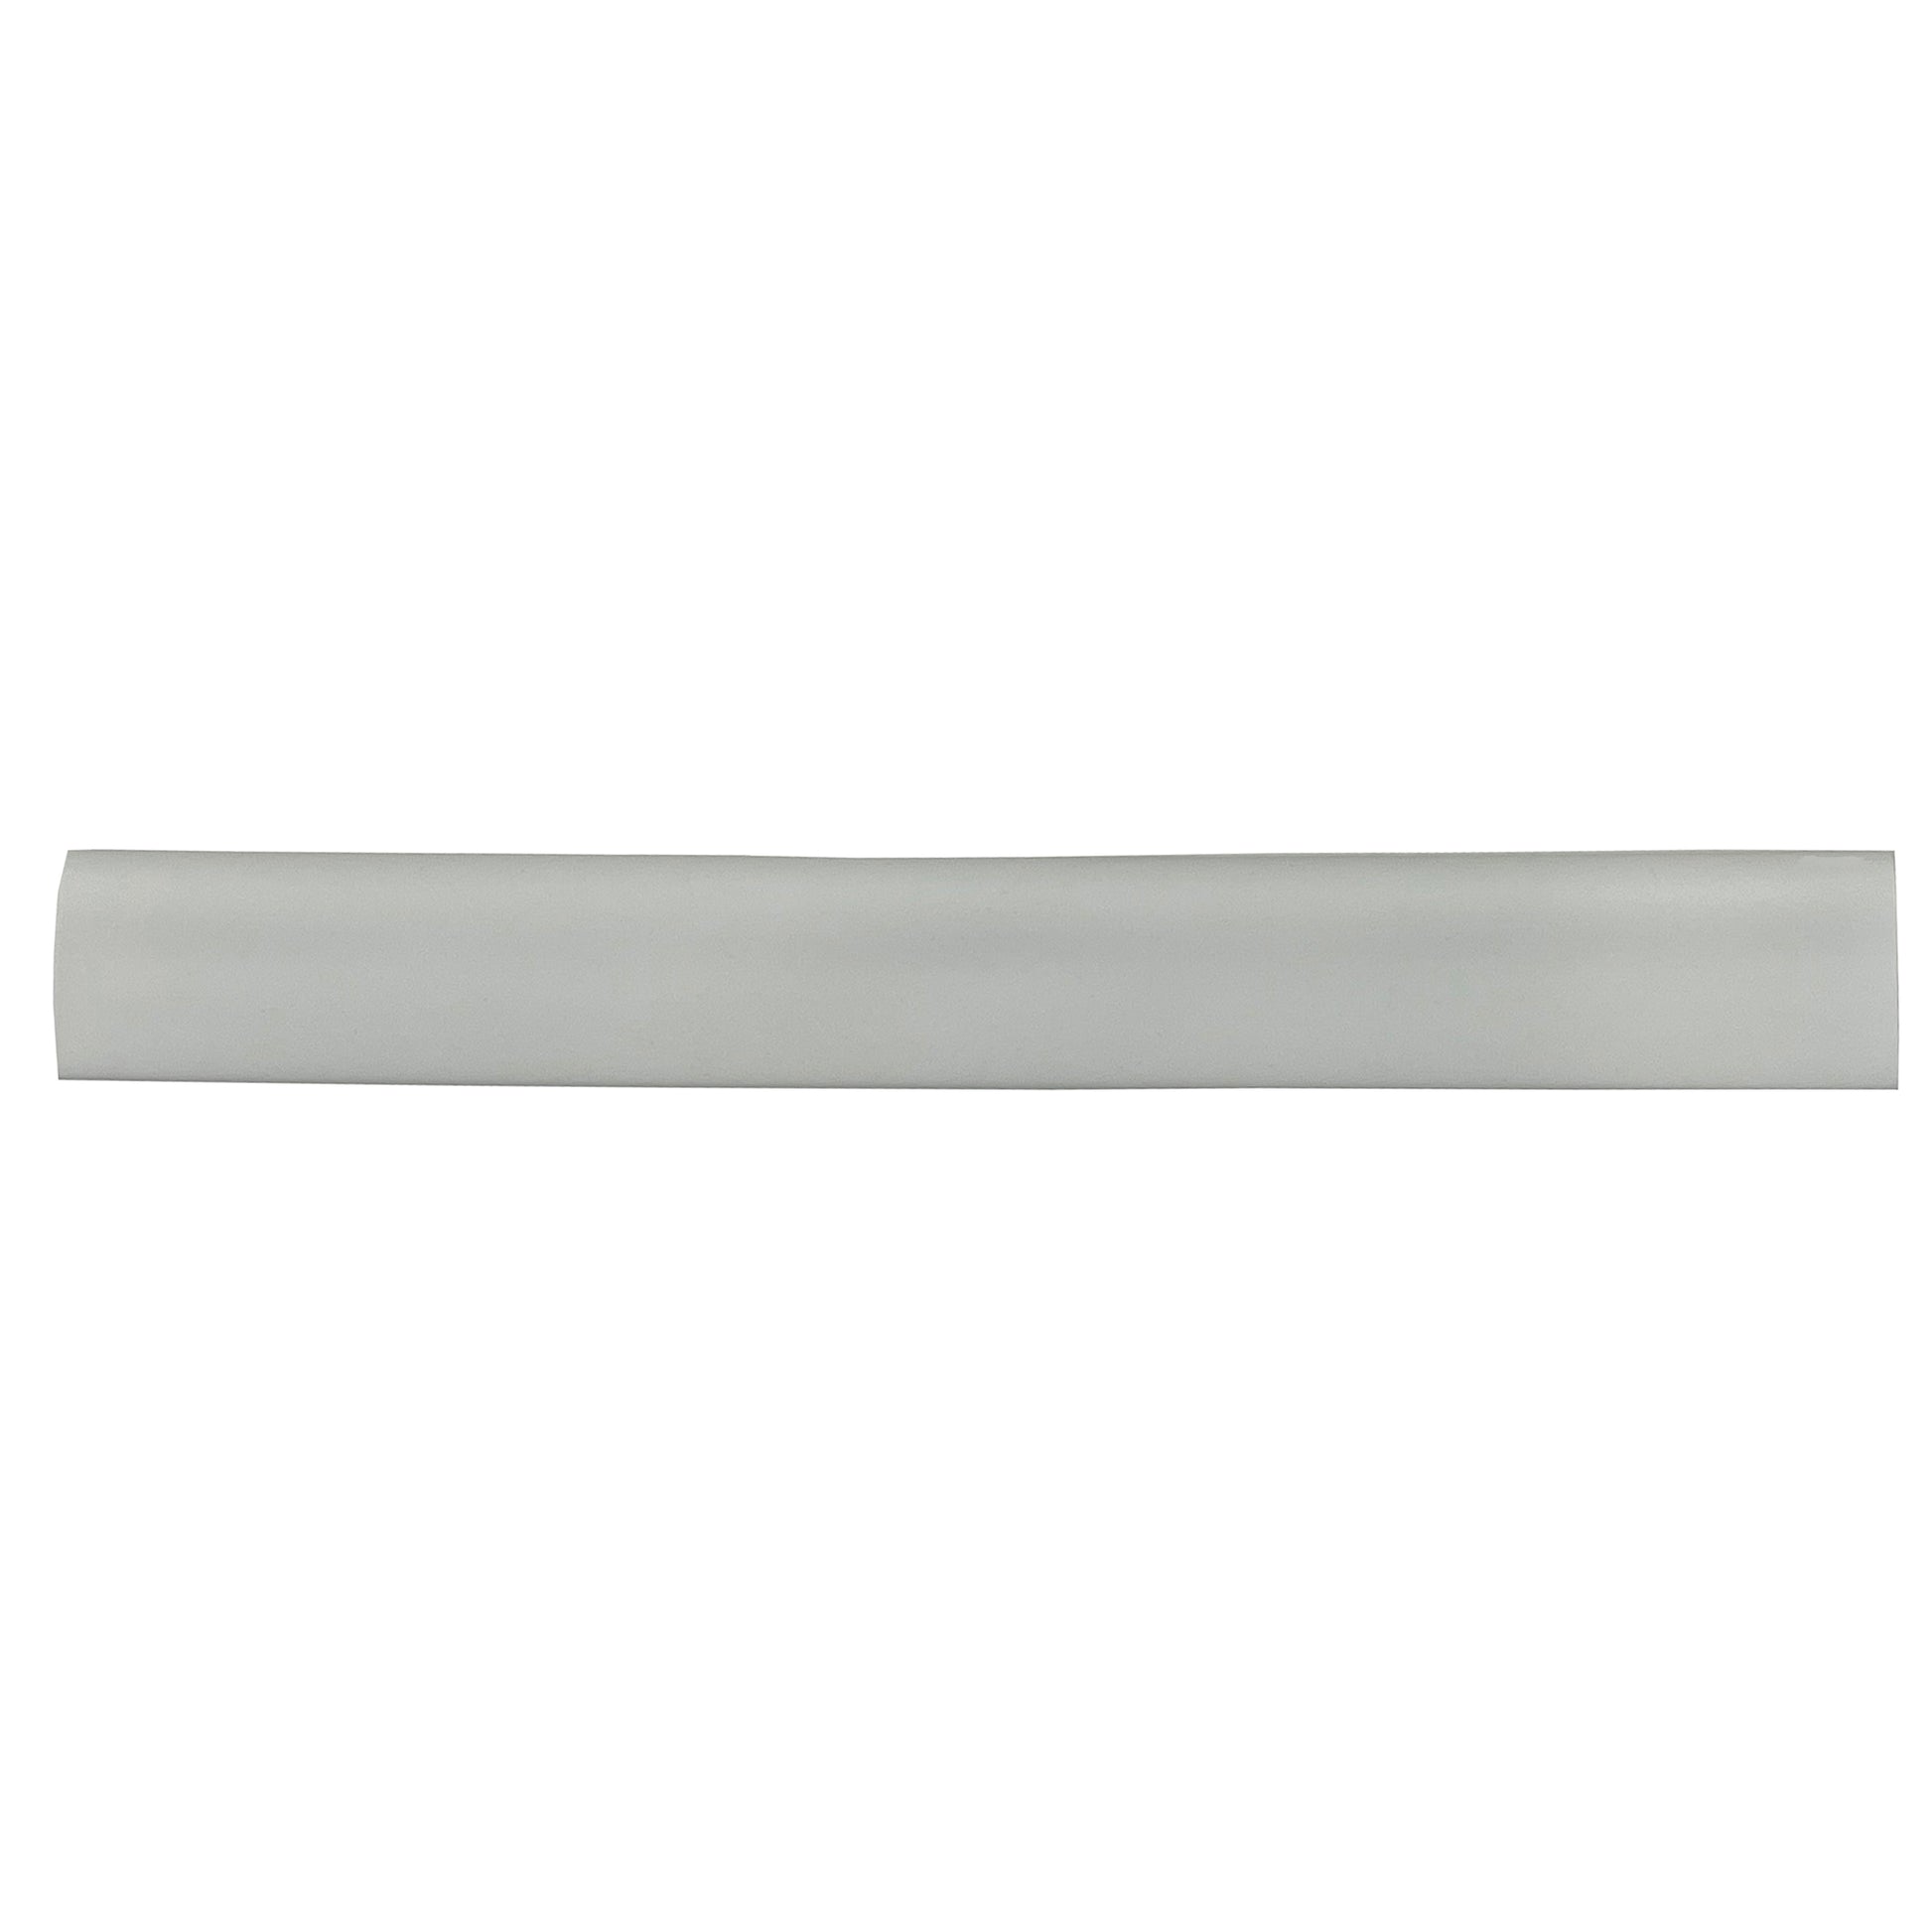 Flexible Thin Single Wall Non-Adhesive Heat Shrink Tubing 2:1 White 1/2" ID - 12" Inch 10 Pack